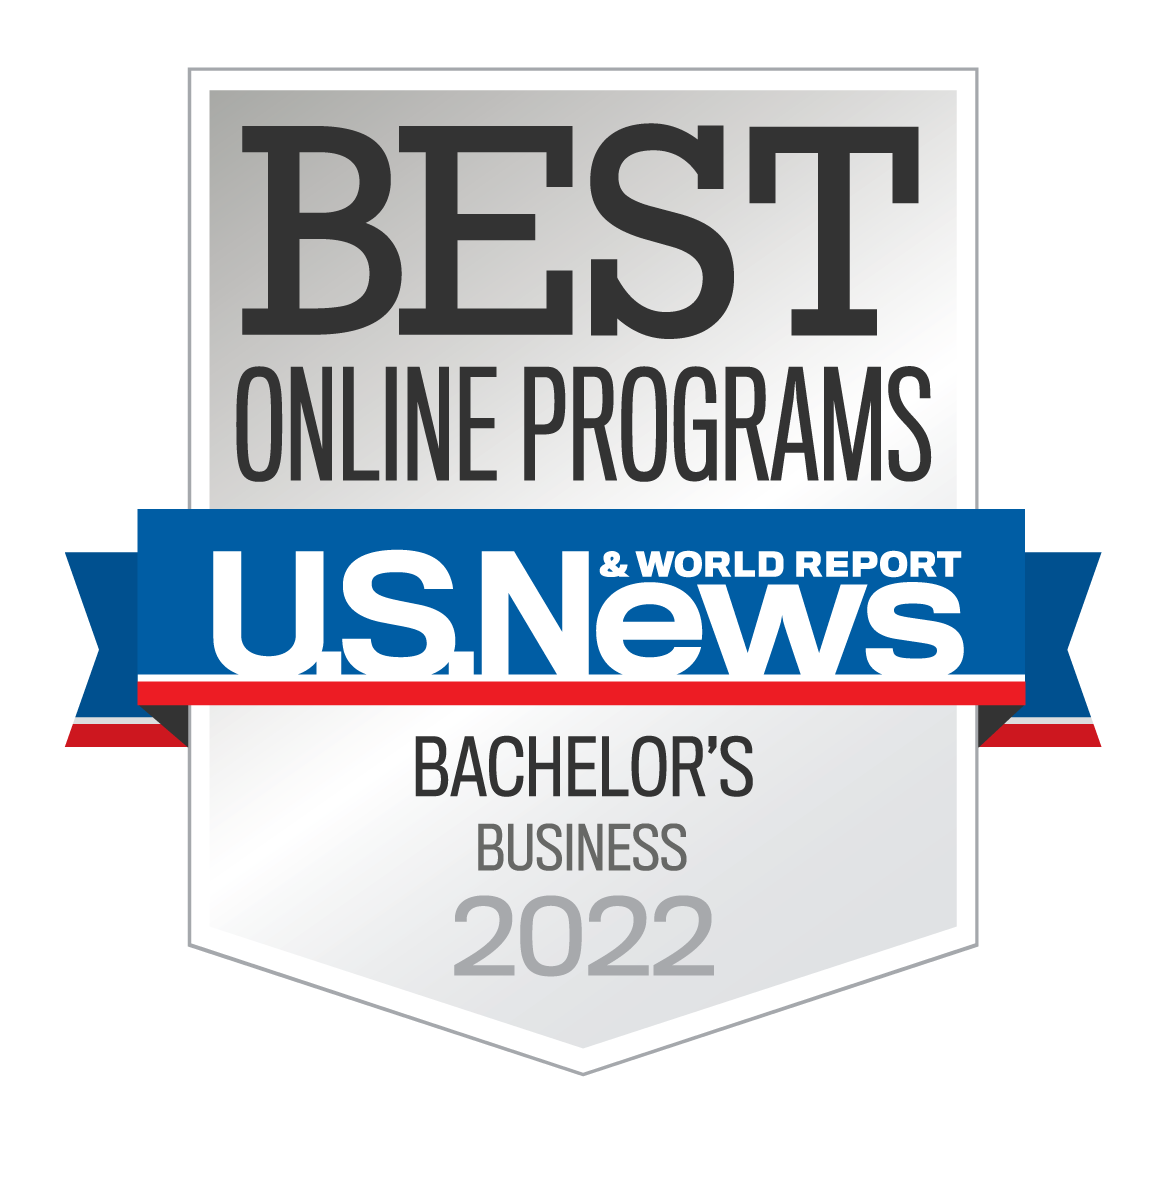 U.S. New and world reports. Best Online Programs: Bachelor's of Business 2022